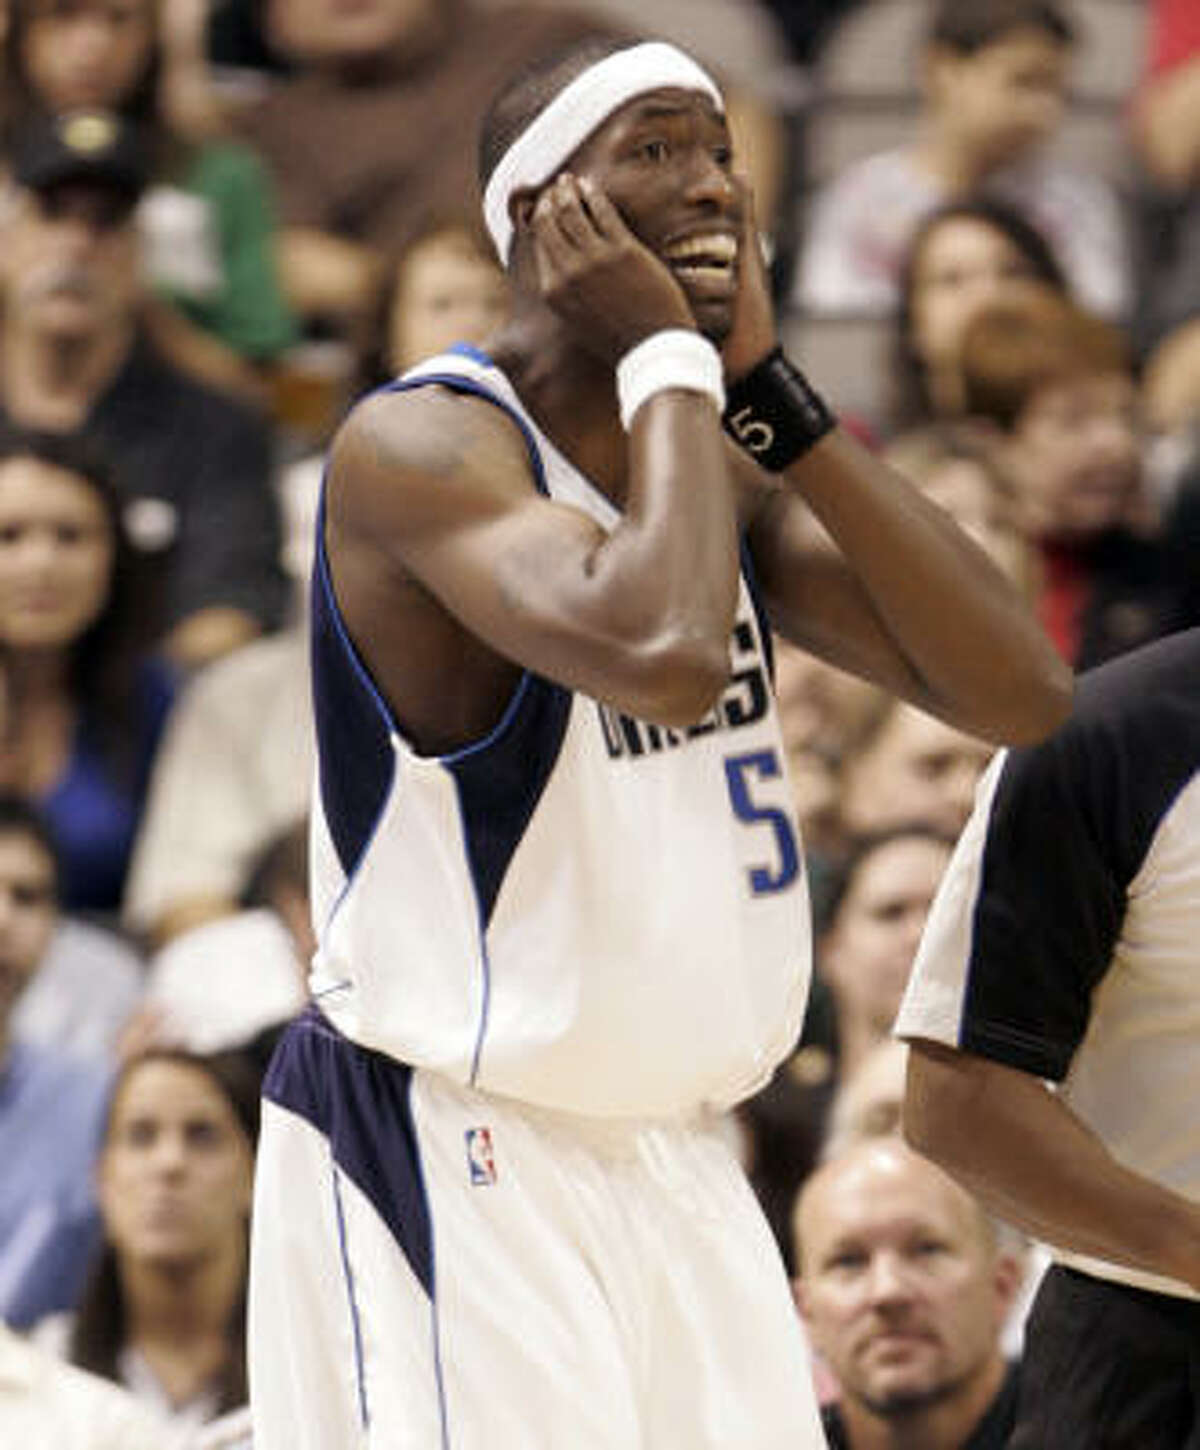 Mavericks forward Josh Howard is surprised by an offensive foul call in the first quarter.